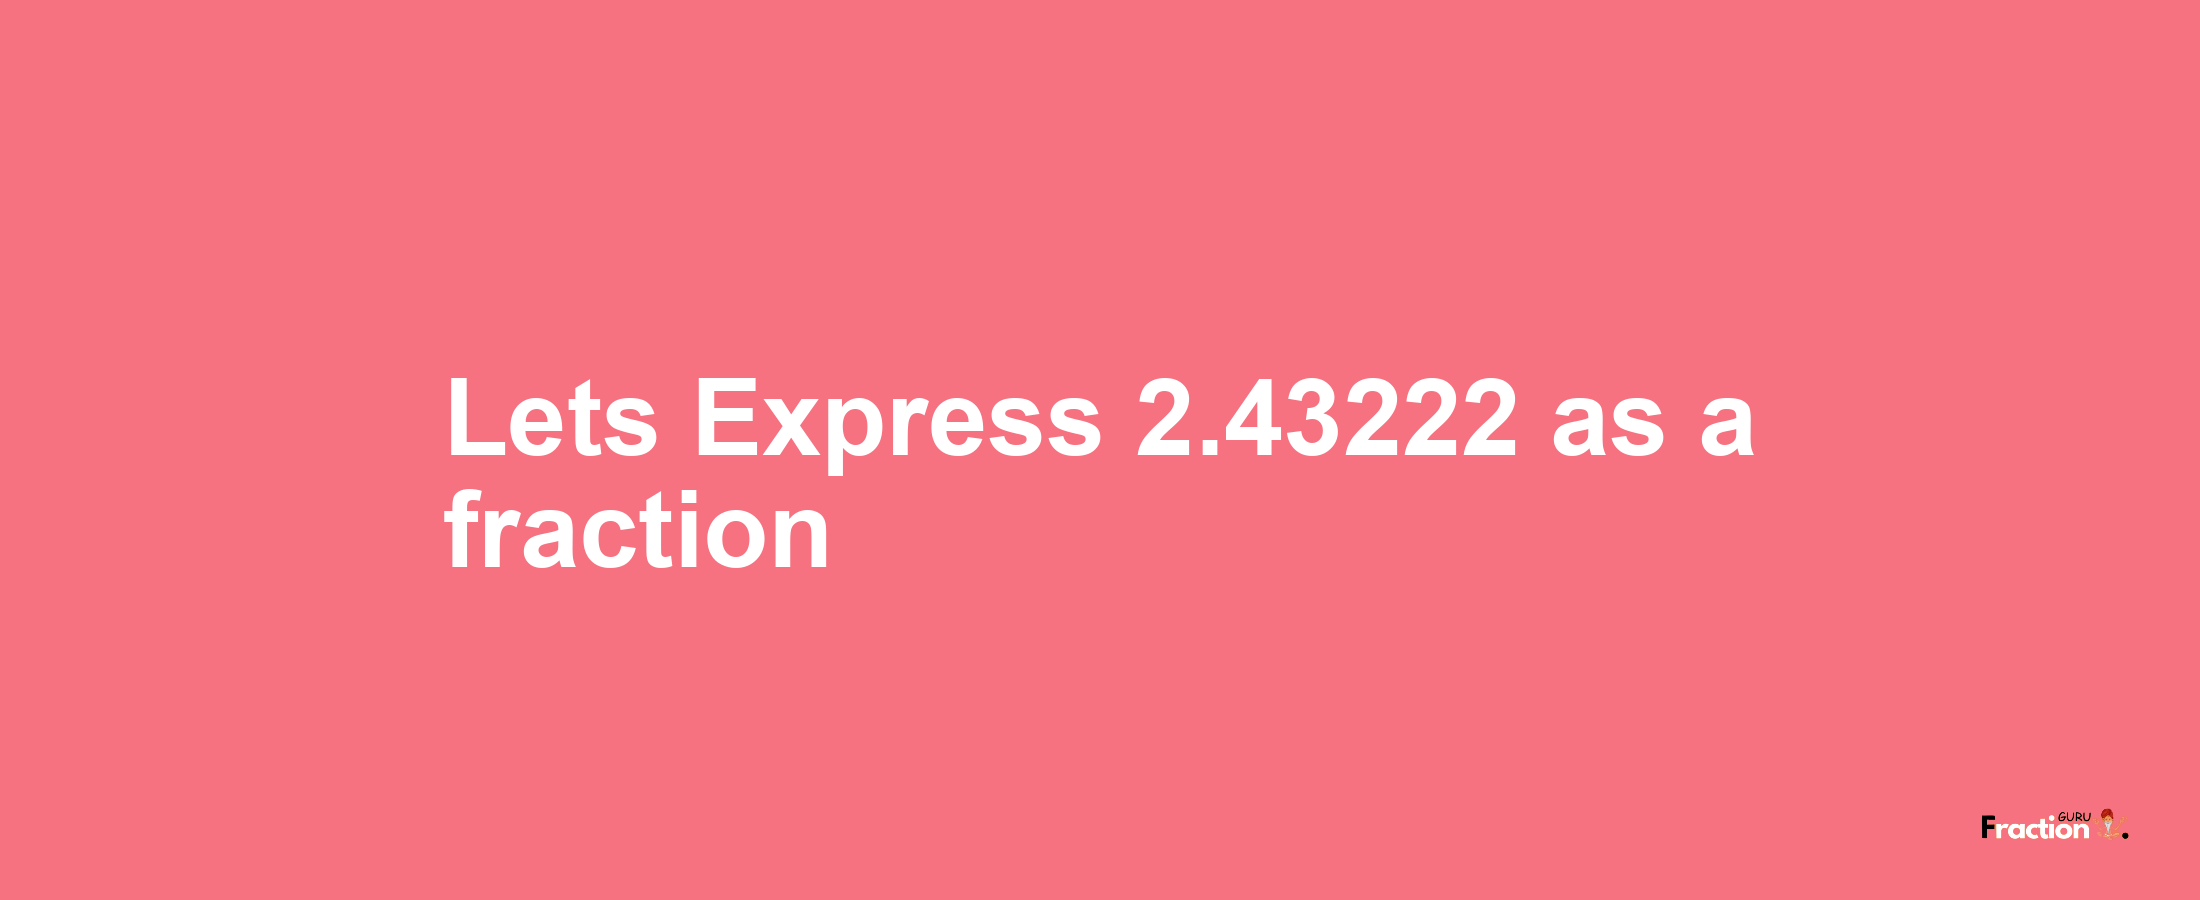 Lets Express 2.43222 as afraction